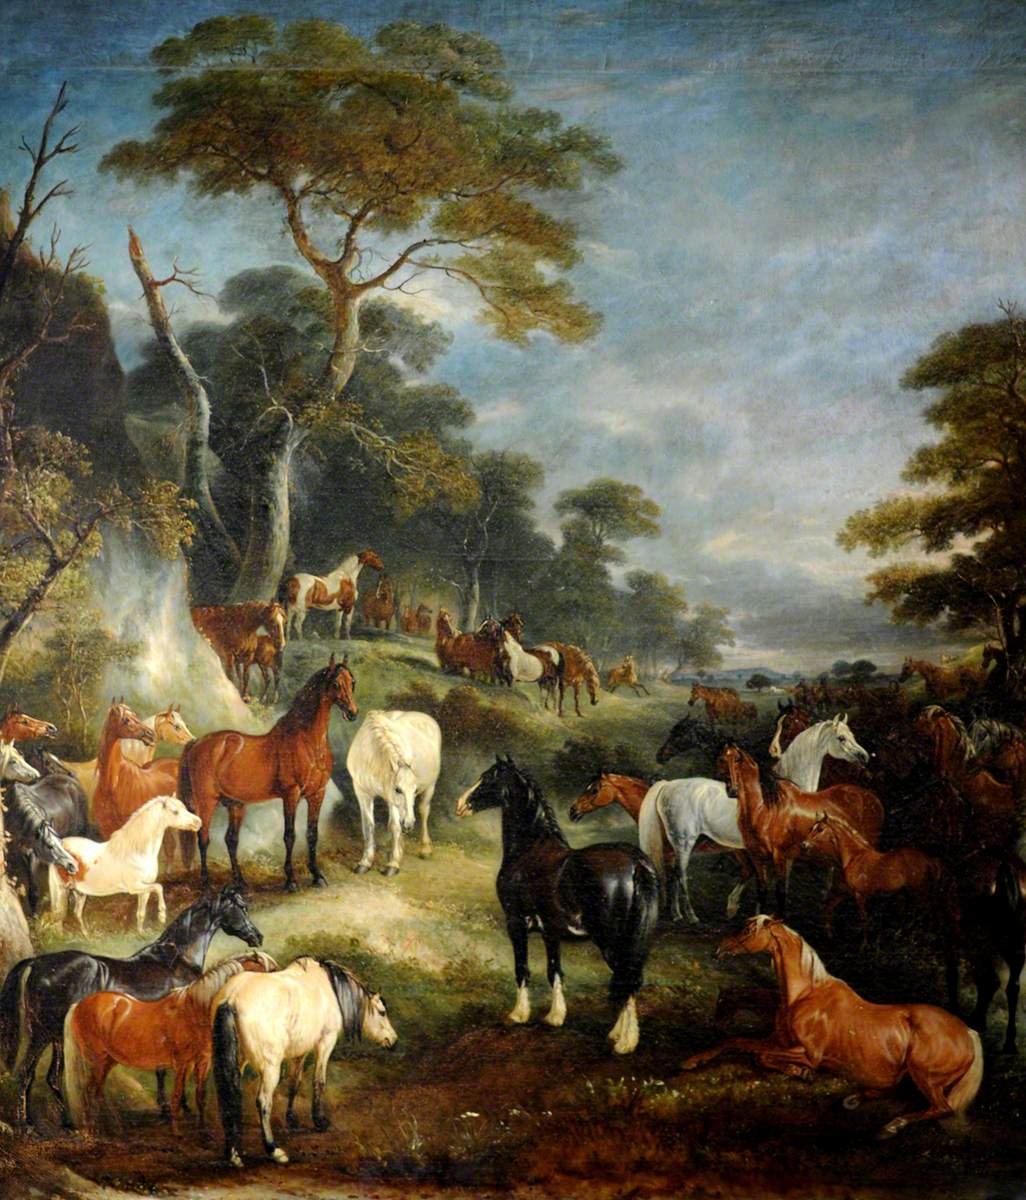 The Council of Horses